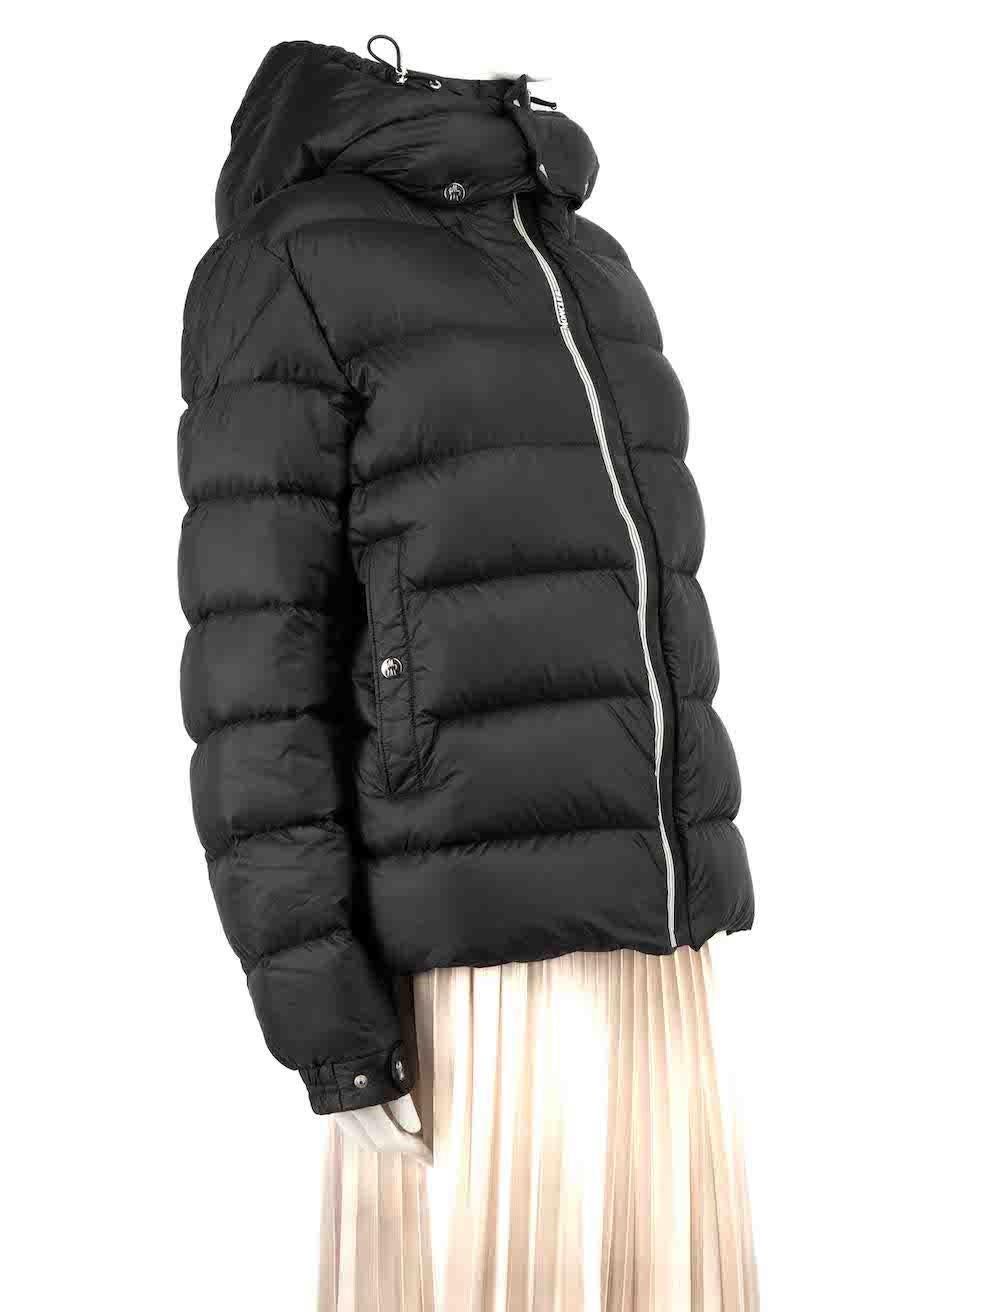 CONDITION is Very good. Minimal wear to jacket is evident. Minimal pulls to fabric on the right arm of this used Moncler designer resale item.
 
 
 
 Details
 
 
 Black
 
 Synthetic
 
 Puffer down jacket
 
 Hooded
 
 Zip fastening
 
 2x Side